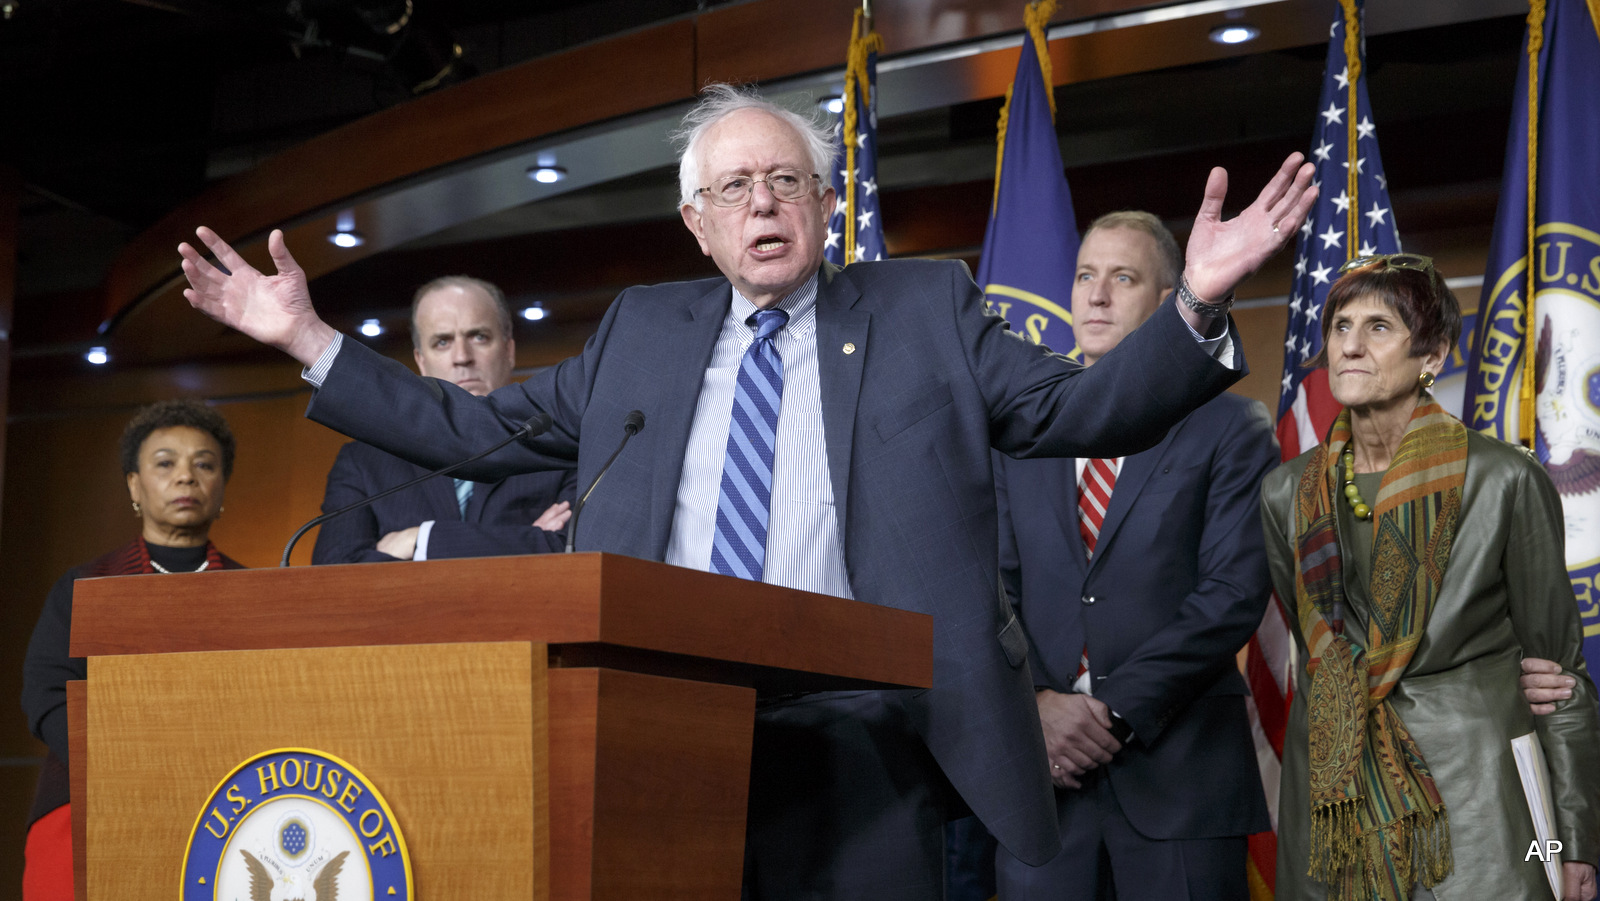 Sen. Bernie Sanders, I-Vt., joins House Democrats in stating their disagreement and disappointment with President Barack Obama's State of the Union request for fast track trade authority, Wednesday, Jan. 21, 2015, on Capitol Hill in Washington.